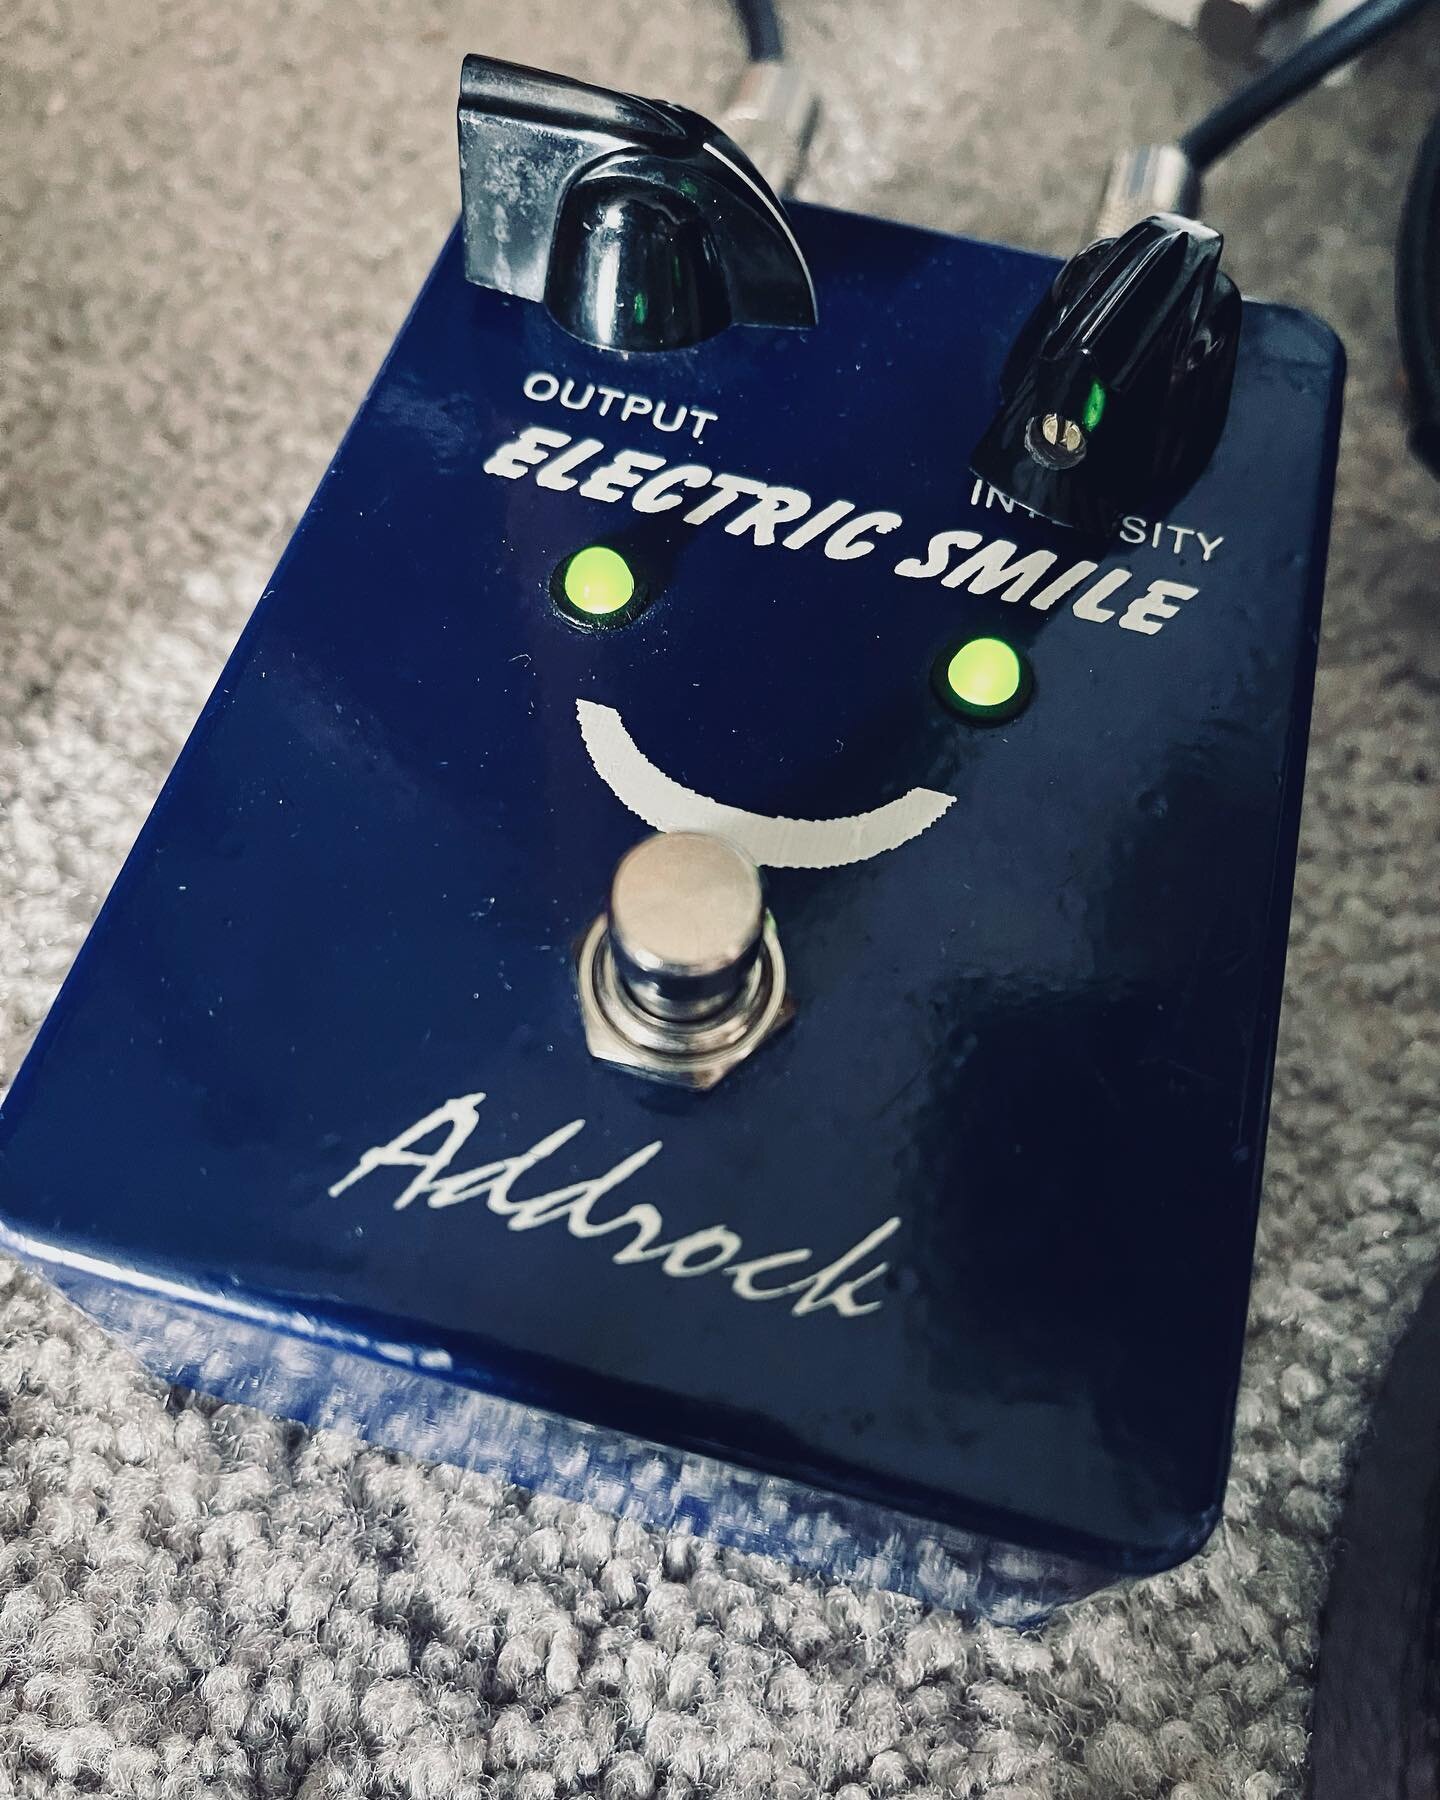 This is a fun one and it keeps smiling back at ya! 👾 #addrock #electricsmile #octavia #octavefuzz #aintmadenomore